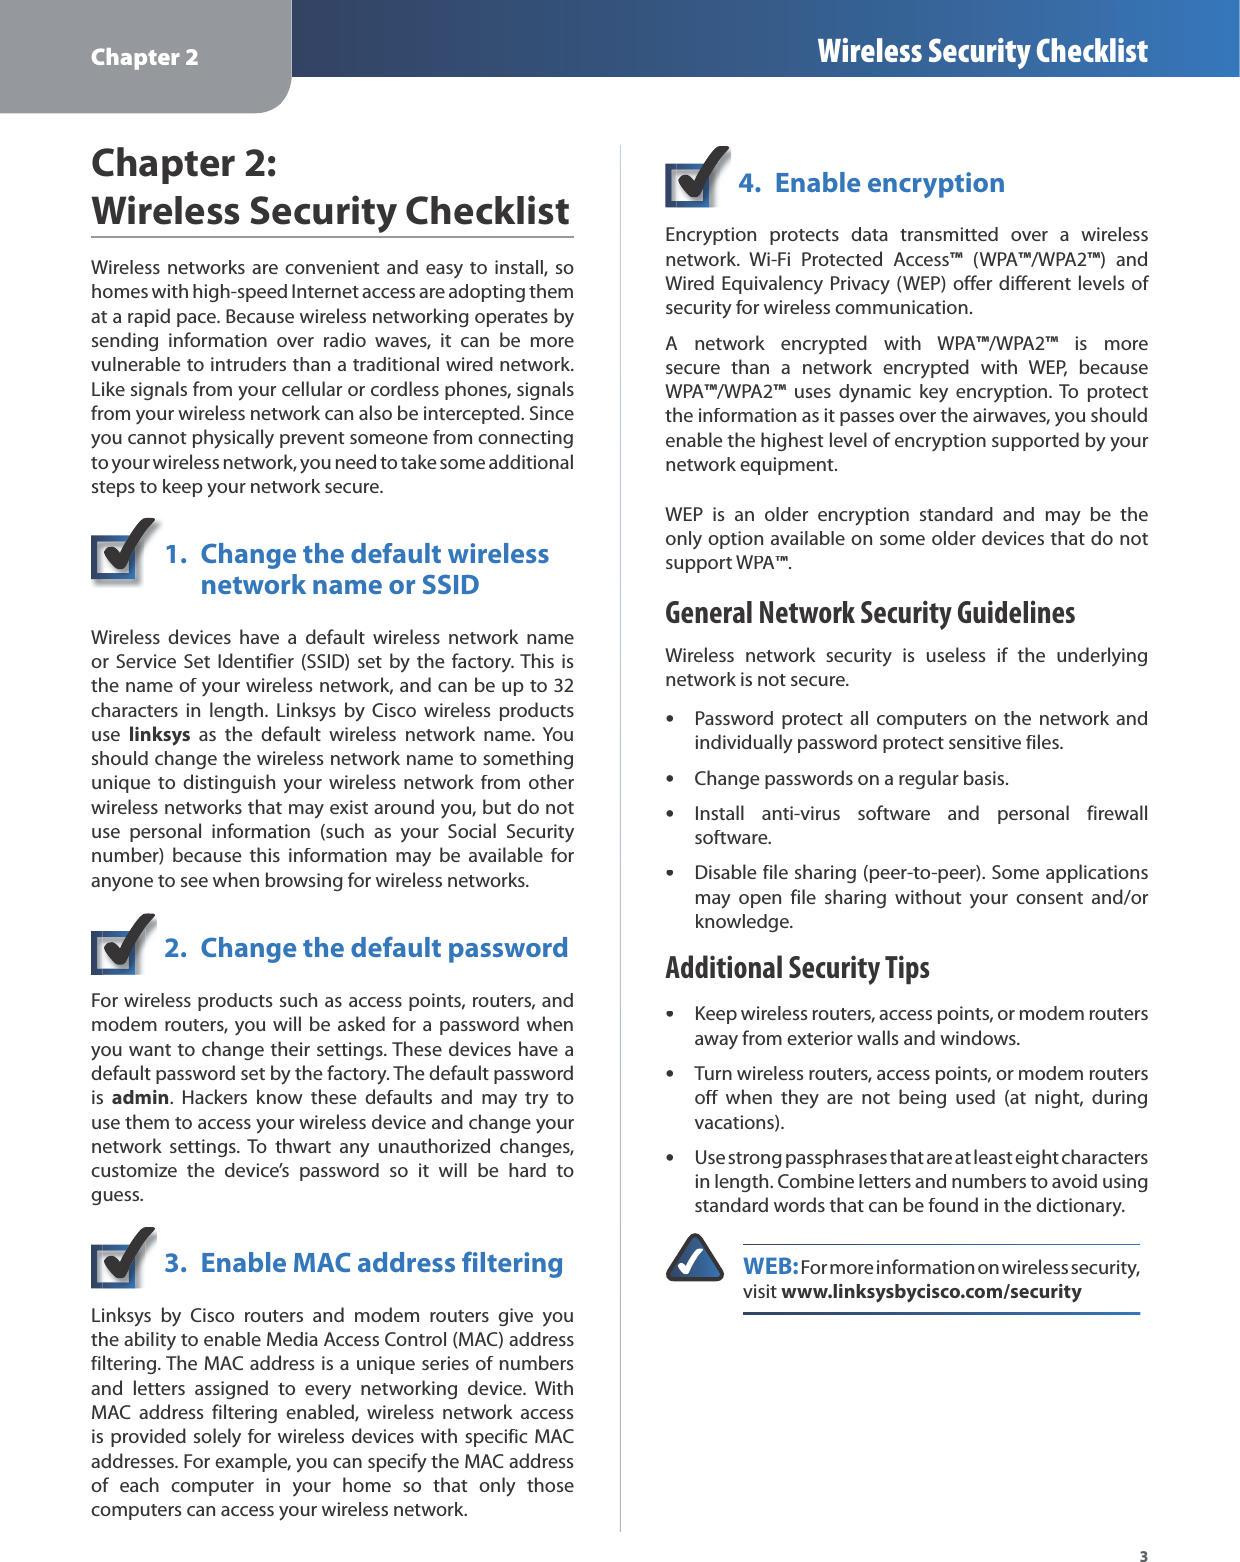 Chapter 2 Wireless Security Checklist3Chapter 2: Wireless Security ChecklistWireless networks are convenient and easy to install, sohomes with high-speed Internet access are adopting themat a rapid pace. Because wireless networking operates bysending information over radio waves, it can be morevulnerable to intruders than a traditional wired network.Like signals from your cellular or cordless phones, signalsfrom your wireless network can also be intercepted. Sinceyou cannot physically prevent someone from connectingto your wireless network, you need to take some additionalsteps to keep your network secure.1.Change the default wireless network name or SSIDWireless devices have a default wireless network nameor Service Set Identifier (SSID) set by the factory. This isthe name of your wireless network, and can be up to 32characters in length. Linksys by Cisco wireless productsuselinksys as the default wireless network name. Youshould change the wireless network name to somethingunique to distinguish your wireless network from otherwireless networks that may exist around you, but do notuse personal information (such as your Social Securitynumber) because this information may be available foranyone to see when browsing for wireless networks.2. Change the default passwordFor wireless products such as access points, routers, andmodem routers, you will be asked for a password whenyou want to change their settings. These devices have adefault password set by the factory. The default passwordisadmin. Hackers know these defaults and may try touse them to access your wireless device and change yournetwork settings. To thwart any unauthorized changes,customize the device’s password so it will be hard toguess.3.Enable MAC address filteringLinksys by Cisco routers and modem routers give youthe ability to enable Media Access Control (MAC) addressfiltering. The MAC address is a unique series of numbersand letters assigned to every networking device. WithMAC address filtering enabled, wireless network accessis provided solely for wireless devices with specific MACaddresses. For example, you can specify the MAC addressof each computer in your home so that only thosecomputers can access your wireless network.4. Enable encryptionEncryption protects data transmitted over a wirelessnetwork. Wi-Fi Protected Access™ (WPA™/WPA2™) andWired Equivalency Privacy (WEP) offer different levels of security for wireless communication.A network encrypted with WPA™/WPA2™ is moresecure than a network encrypted with WEP, becauseWPA™/WPA2™ uses dynamic key encryption. To protectthe information as it passes over the airwaves, you shouldenable the highest level of encryption supported by yournetwork equipment.WEP is an older encryption standard and may be theonly option available on some older devices that do notsupport WPA™.General Network Security GuidelinesWireless network security is useless if the underlyingnetwork is not secure.sPassword protect all computers on the network andindividually password protect sensitive files.sChange passwords on a regular basis.sInstall anti-virus software and personal firewallsoftware.sDisable file sharing (peer-to-peer). Some applicationsmay open file sharing without your consent and/orknowledge.Additional Security TipssKeep wireless routers, access points, or modem routersaway from exterior walls and windows.sTurn wireless routers, access points, or modem routersoff when they are not being used (at night, duringvacations).sUse strong passphrases that are at least eight charactersin length. Combine letters and numbers to avoid usingstandard words that can be found in the dictionary.WEB: For more information on wireless security,visitwww.linksysbycisco.com/security